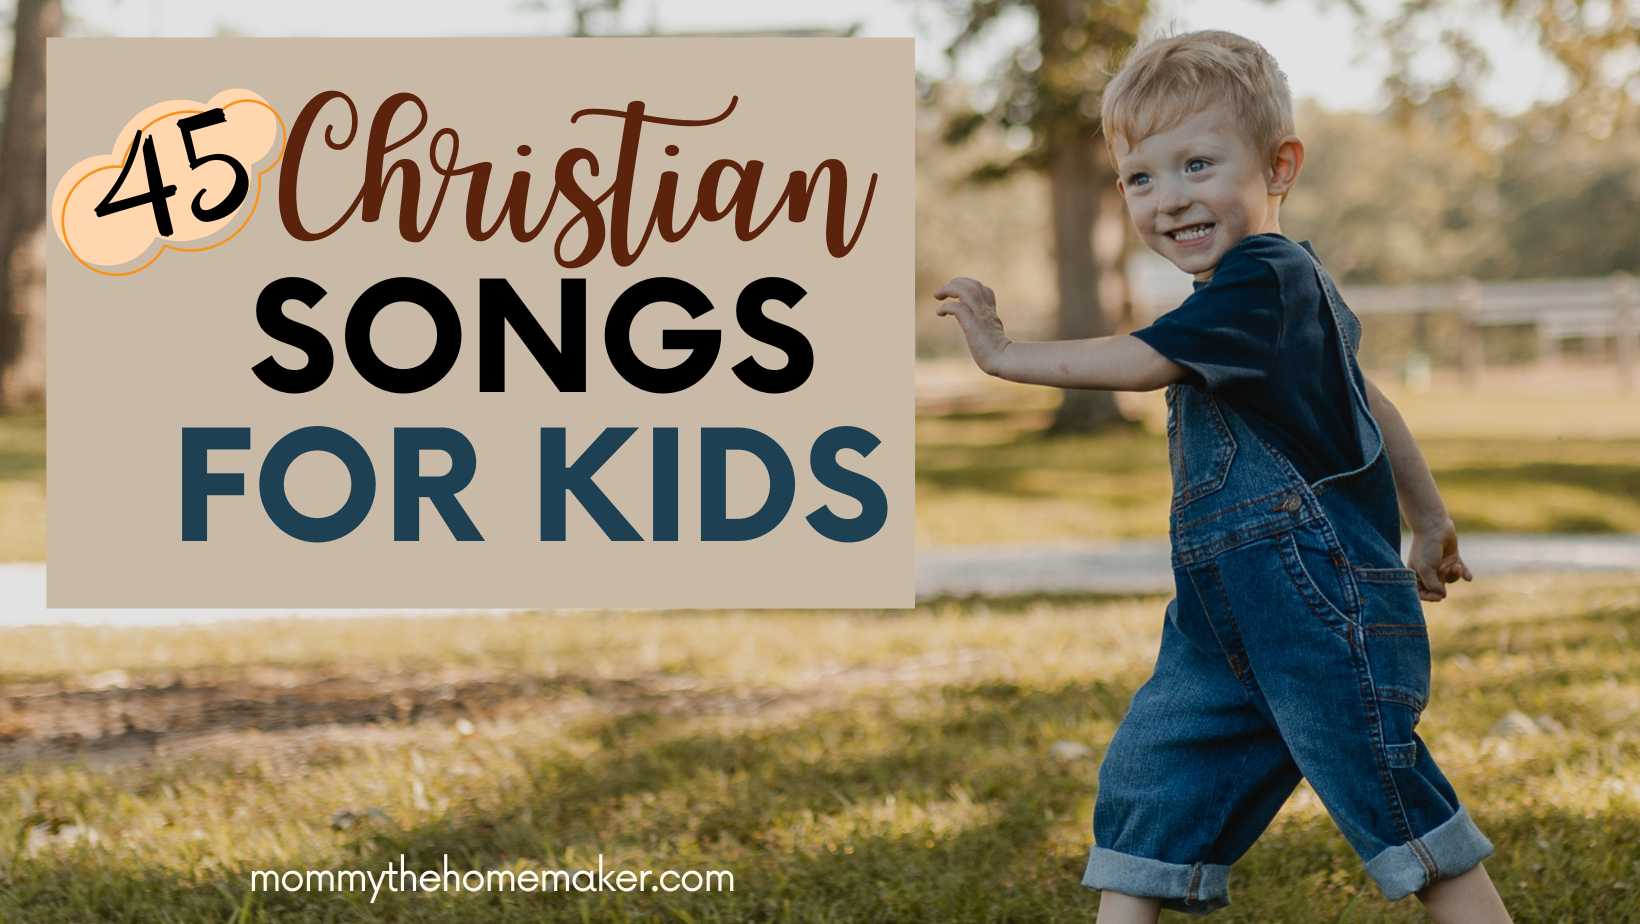 graphic that says 45 Christian songs for kids with a picture of a little boy in jean overalls running across the camera